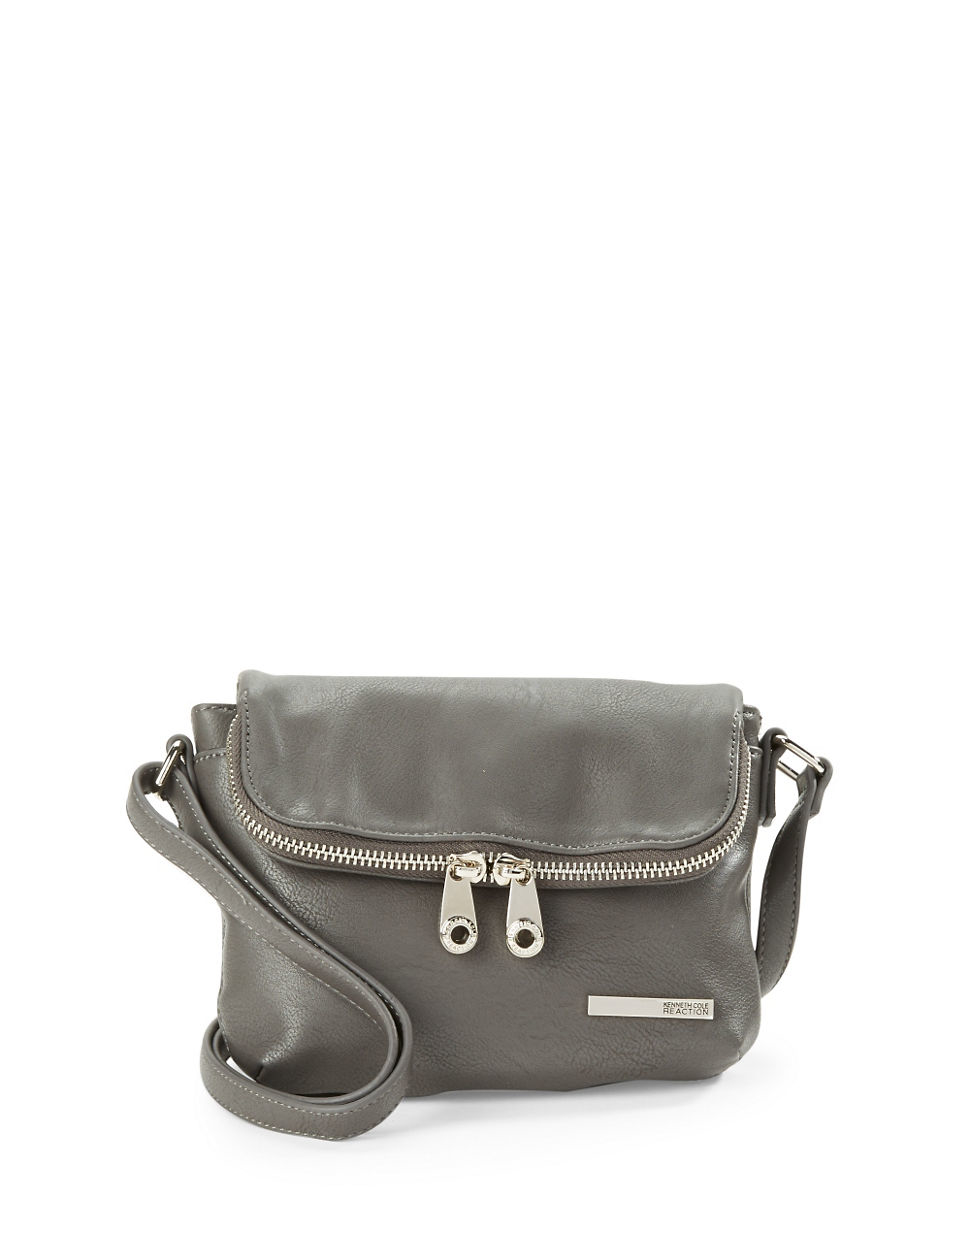 Kenneth cole reaction Wooster Street Leather Foldover Crossbody Bag in ...